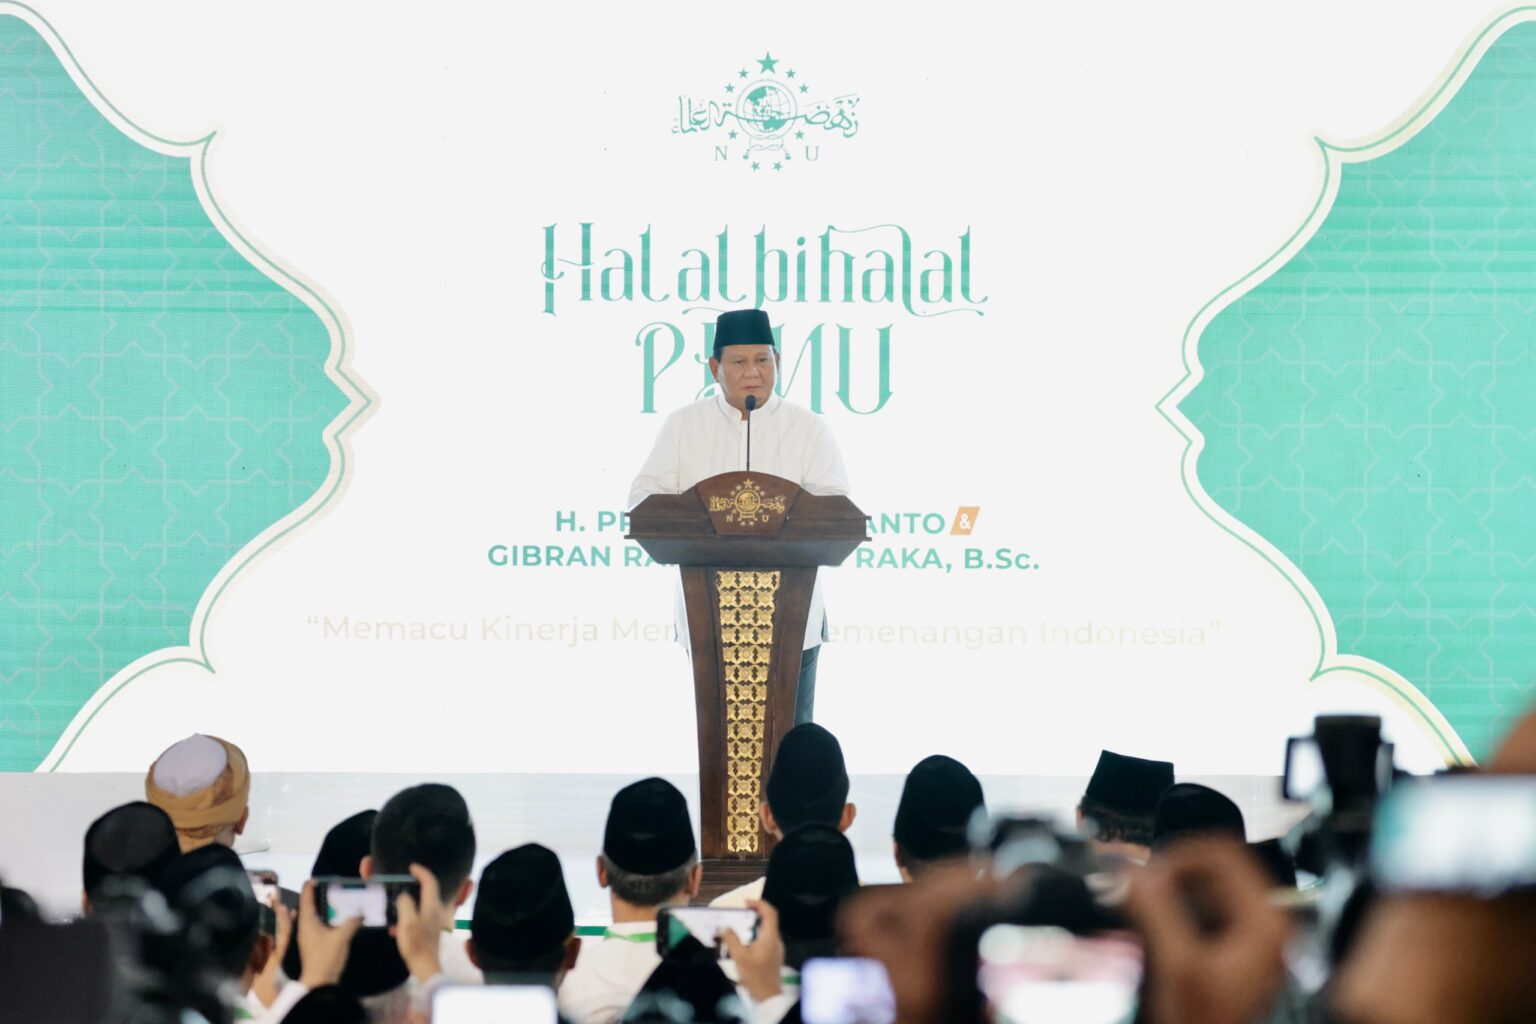 Prabowo Subianto: Thank You for NU’s Commitment to Oversee and Support the Upcoming Government